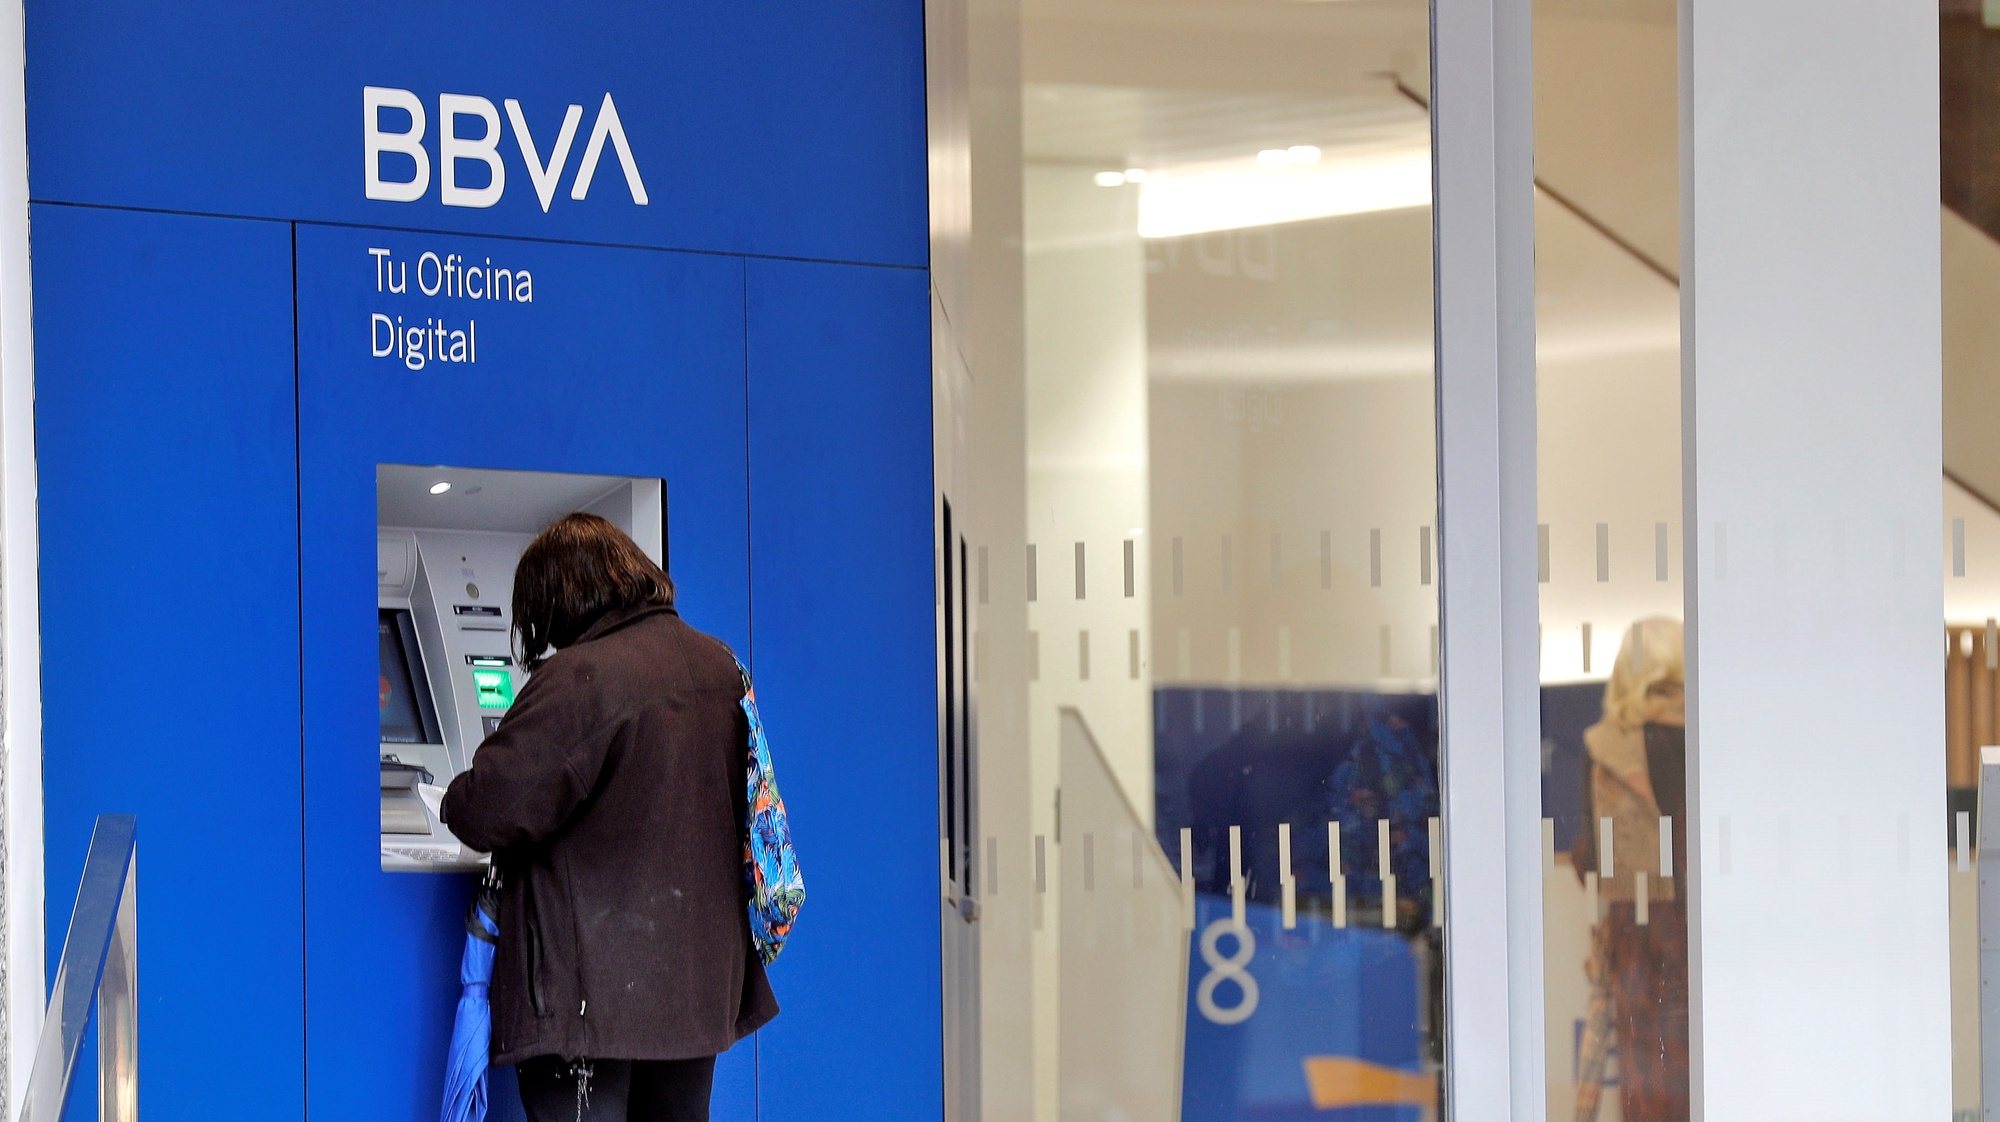 epa08300208 A woman withdraws cash from an ATM at a local branch of the BBVA bank in Valencia, eastern Spain, 17 March 2020. Spain faces its third day of the state of emergency declared by the Spanish authorities over the ongoing pandemic of the COVID-19 disease caused by the SARS-CoV-2 coronavirus.  EPA/MANUEL BRUQUE